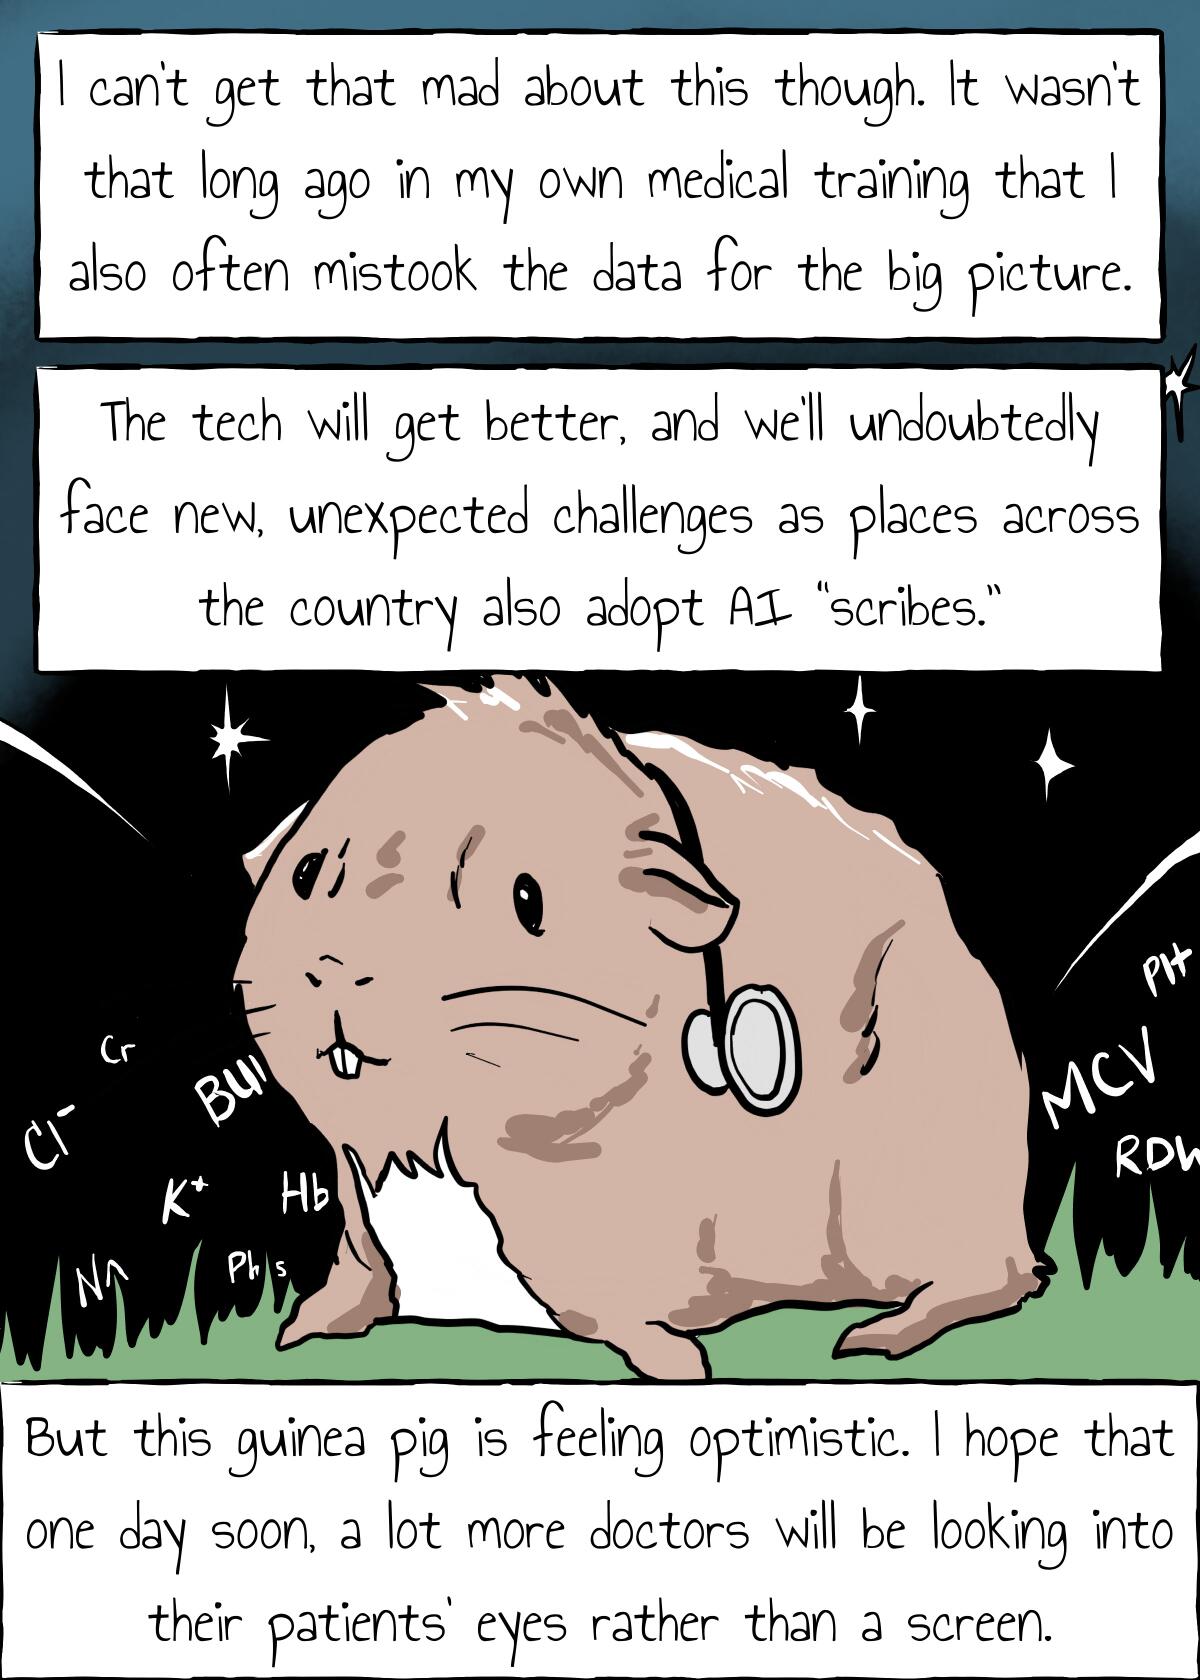 Technology will improve and we will face new challenges as more places adopt AI.  But this guinea pig is feeling optimistic.